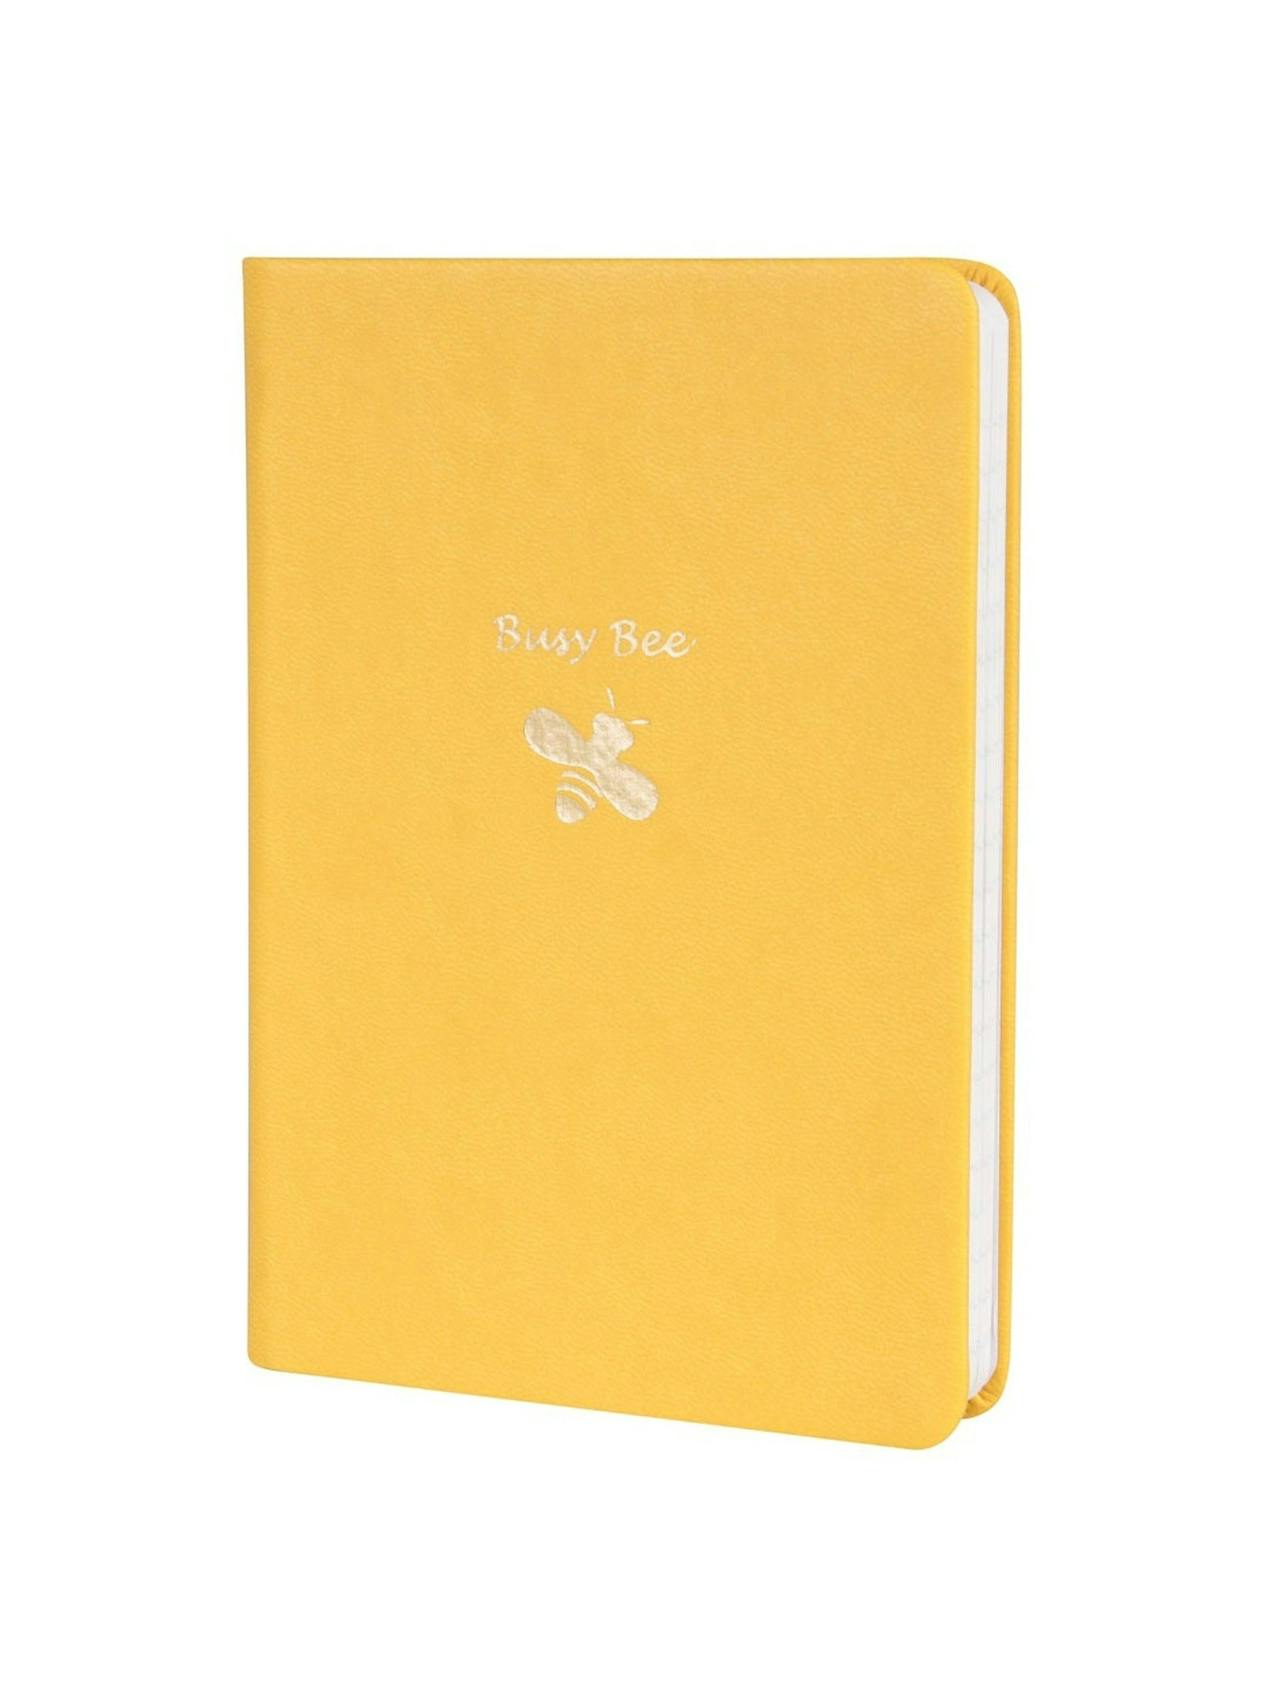 Busy bee pocket leather plain journal